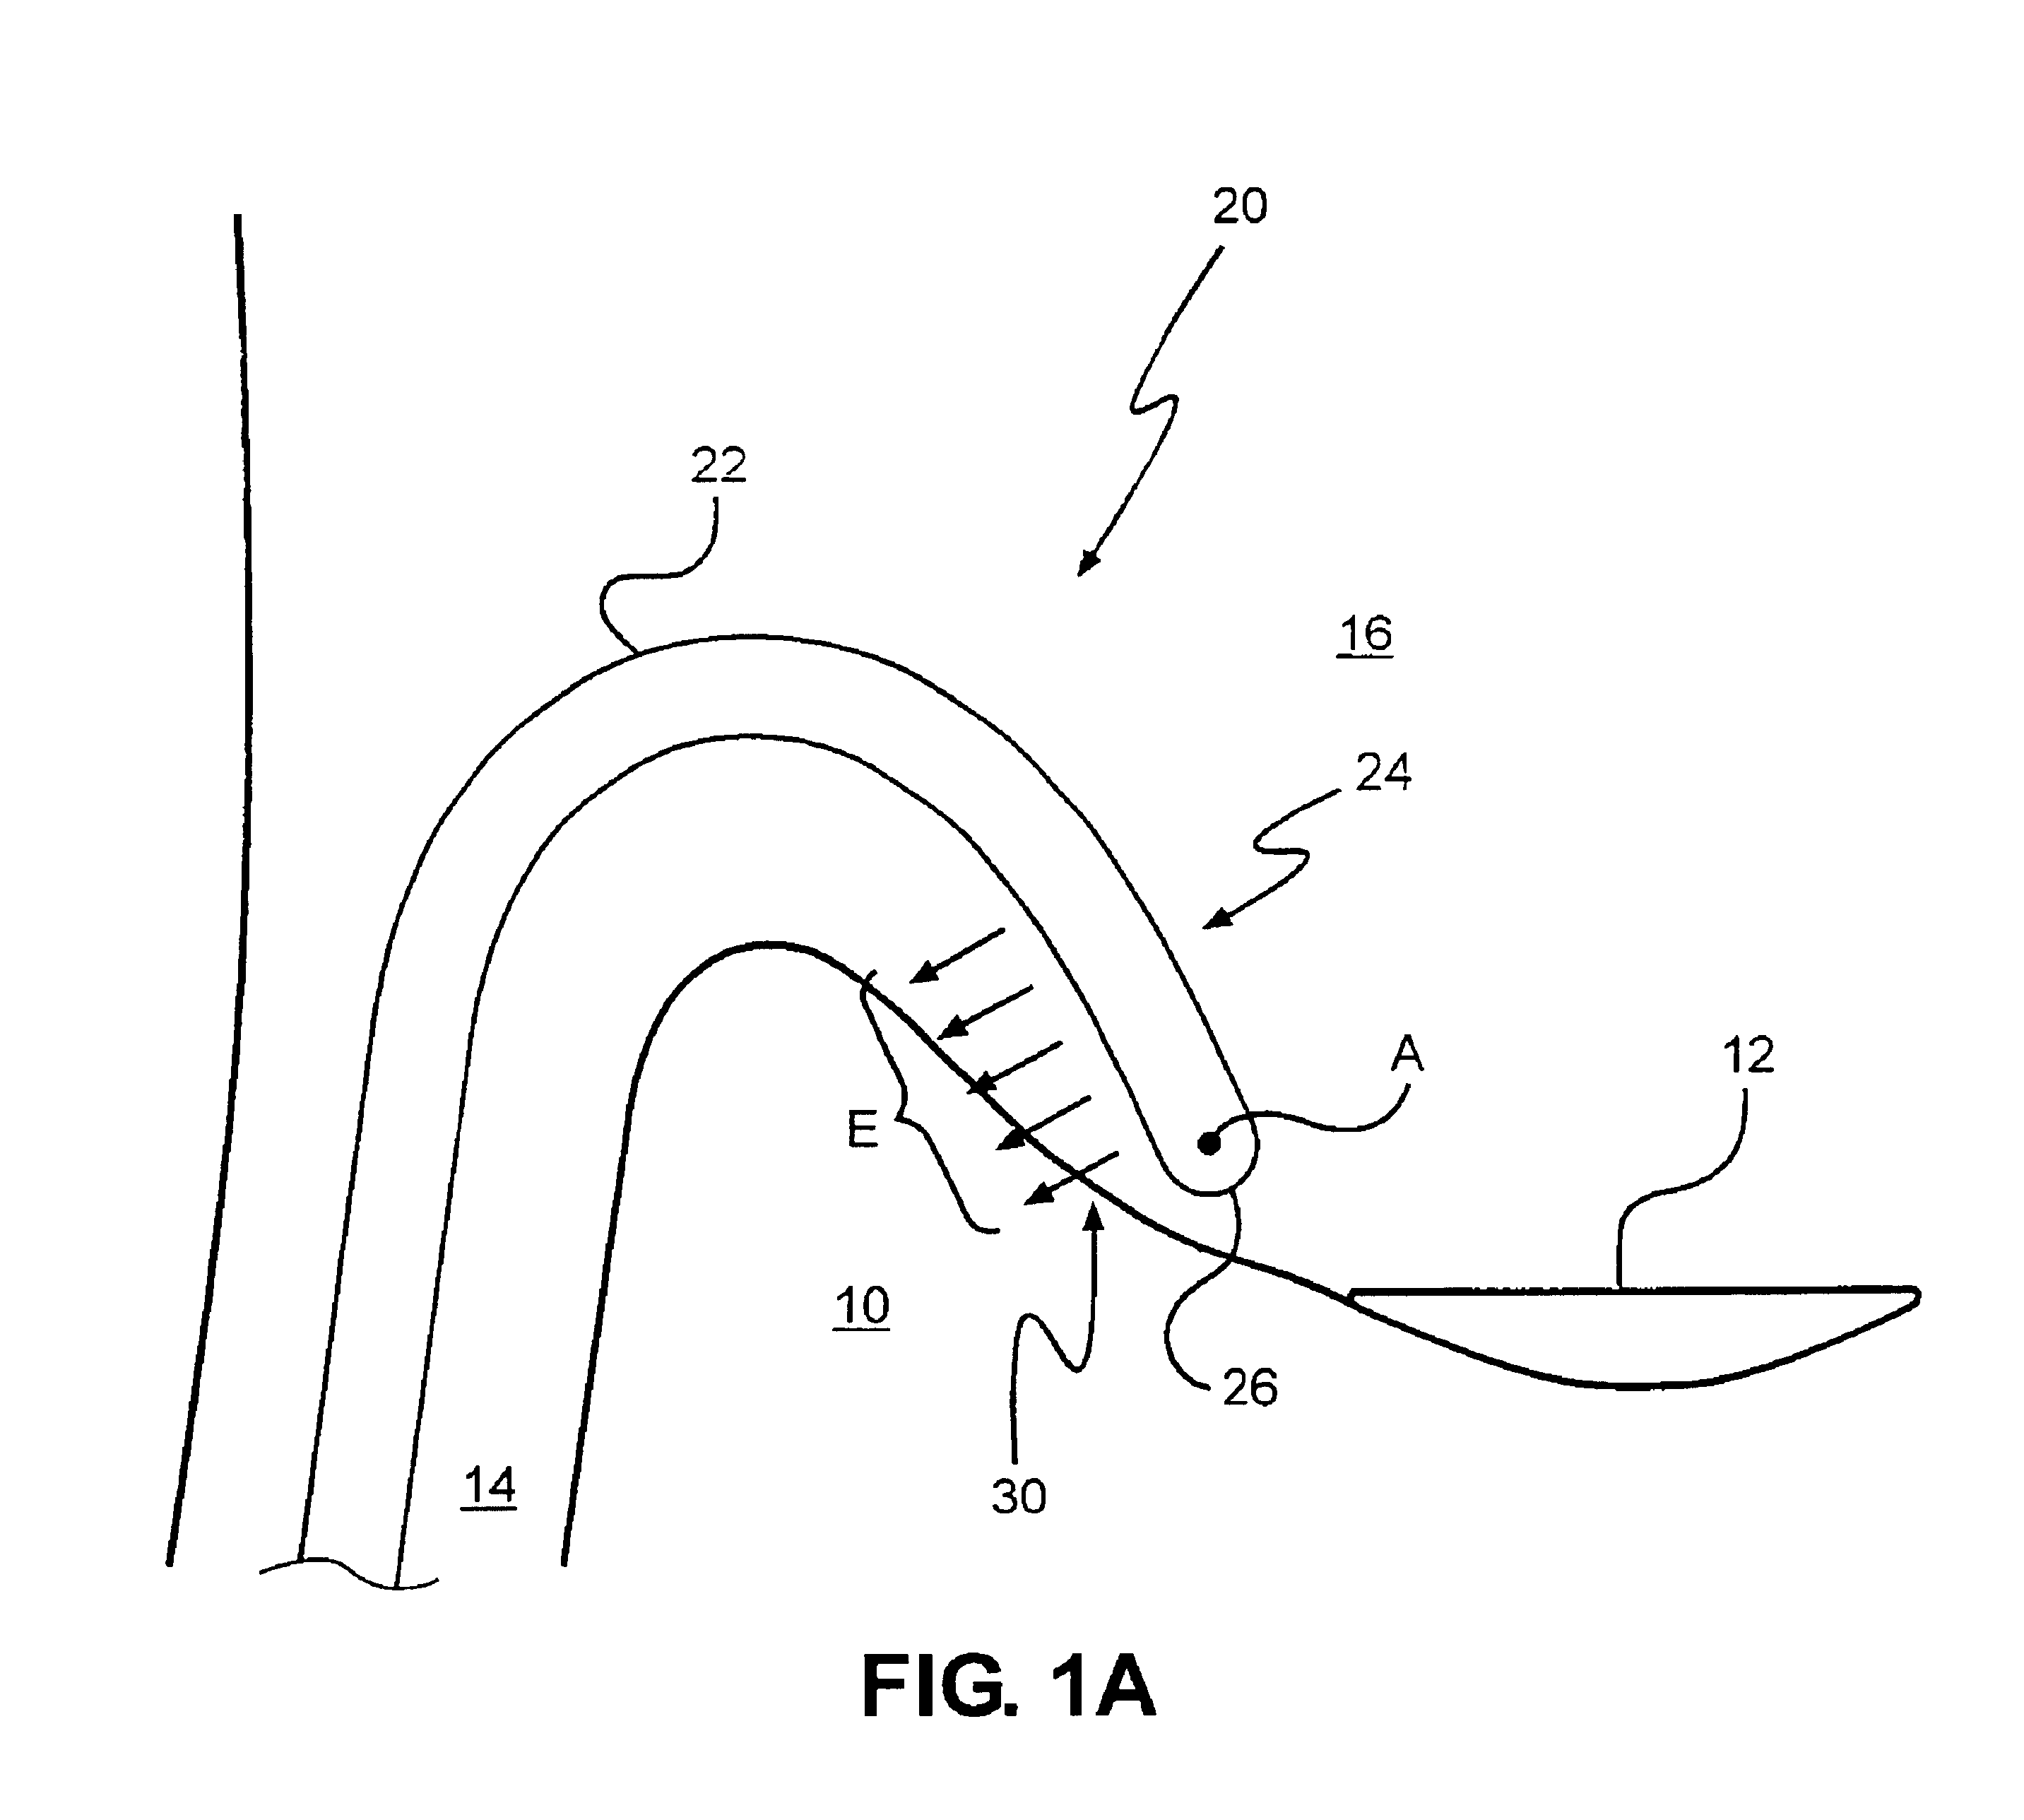 Ablation instrument having a flexible distal portion